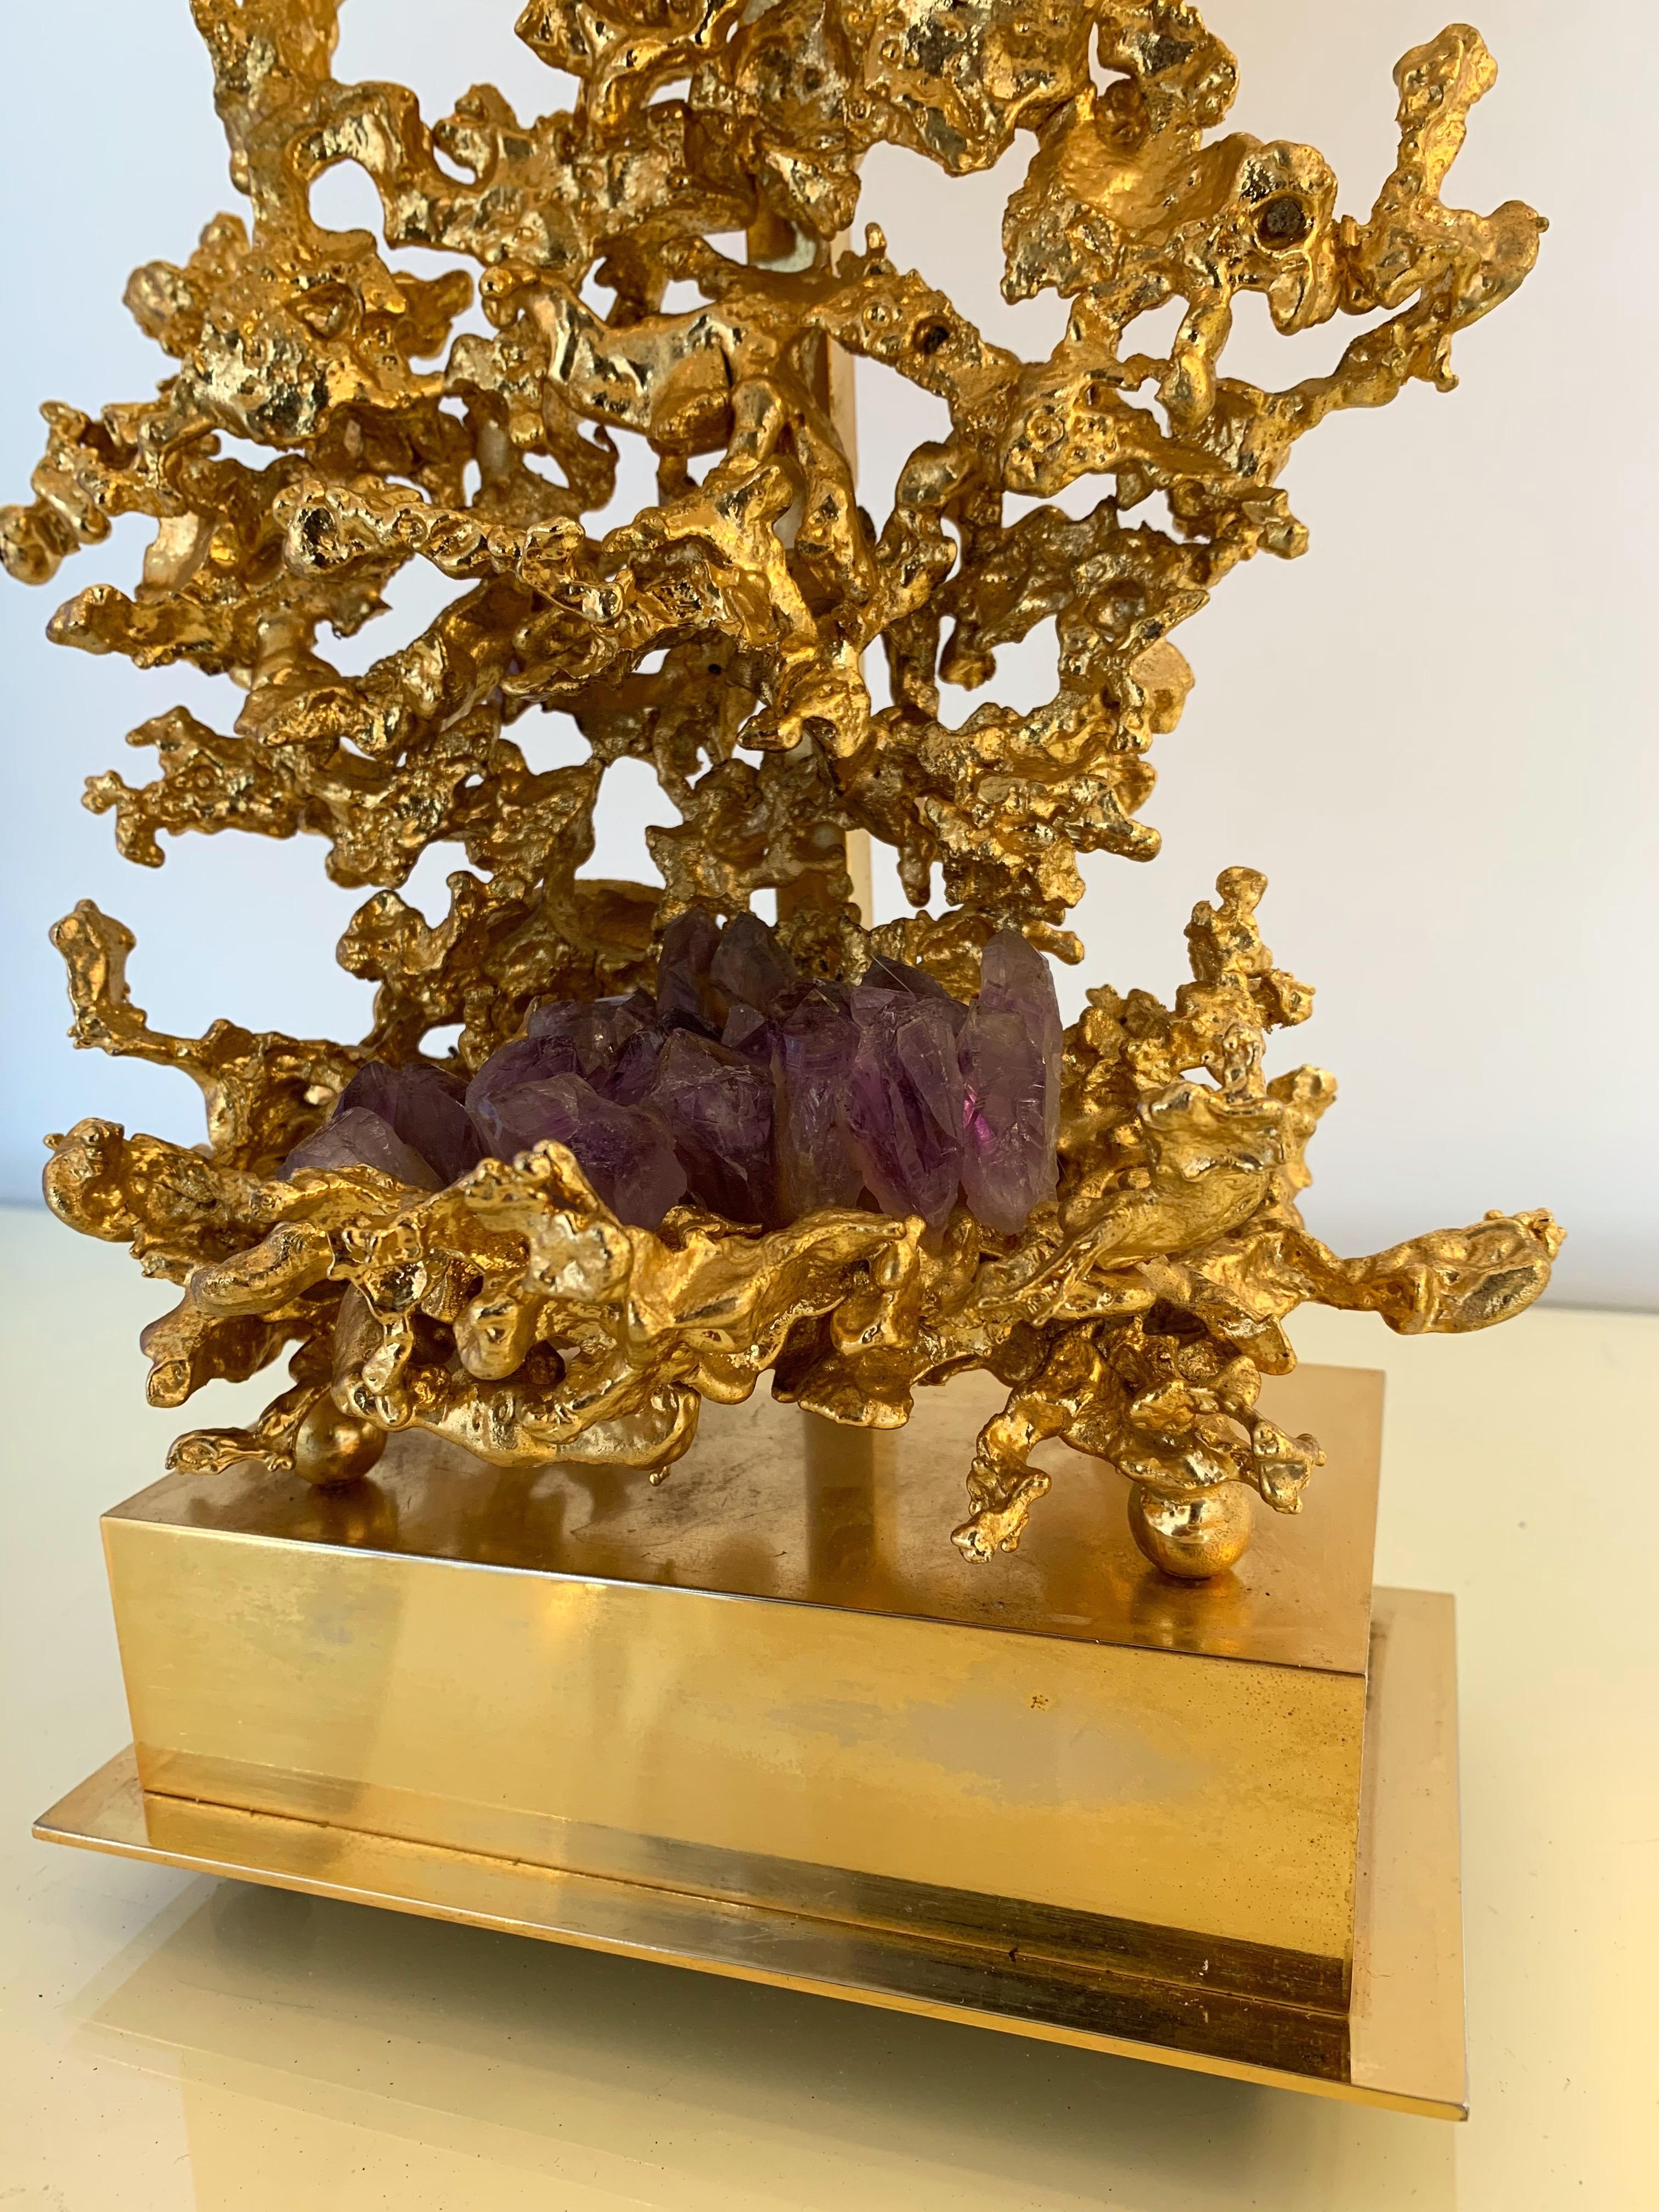 Rare pair of gilt bronze and Amethyst stone lamps by the artist Claude Victor Boeltz. Unusual technic called by the artist Explosed bronze. Sign ingrave Boeltz ¨Paris. Original shades from the 1970s. Height top finial 36cms. Famous design like